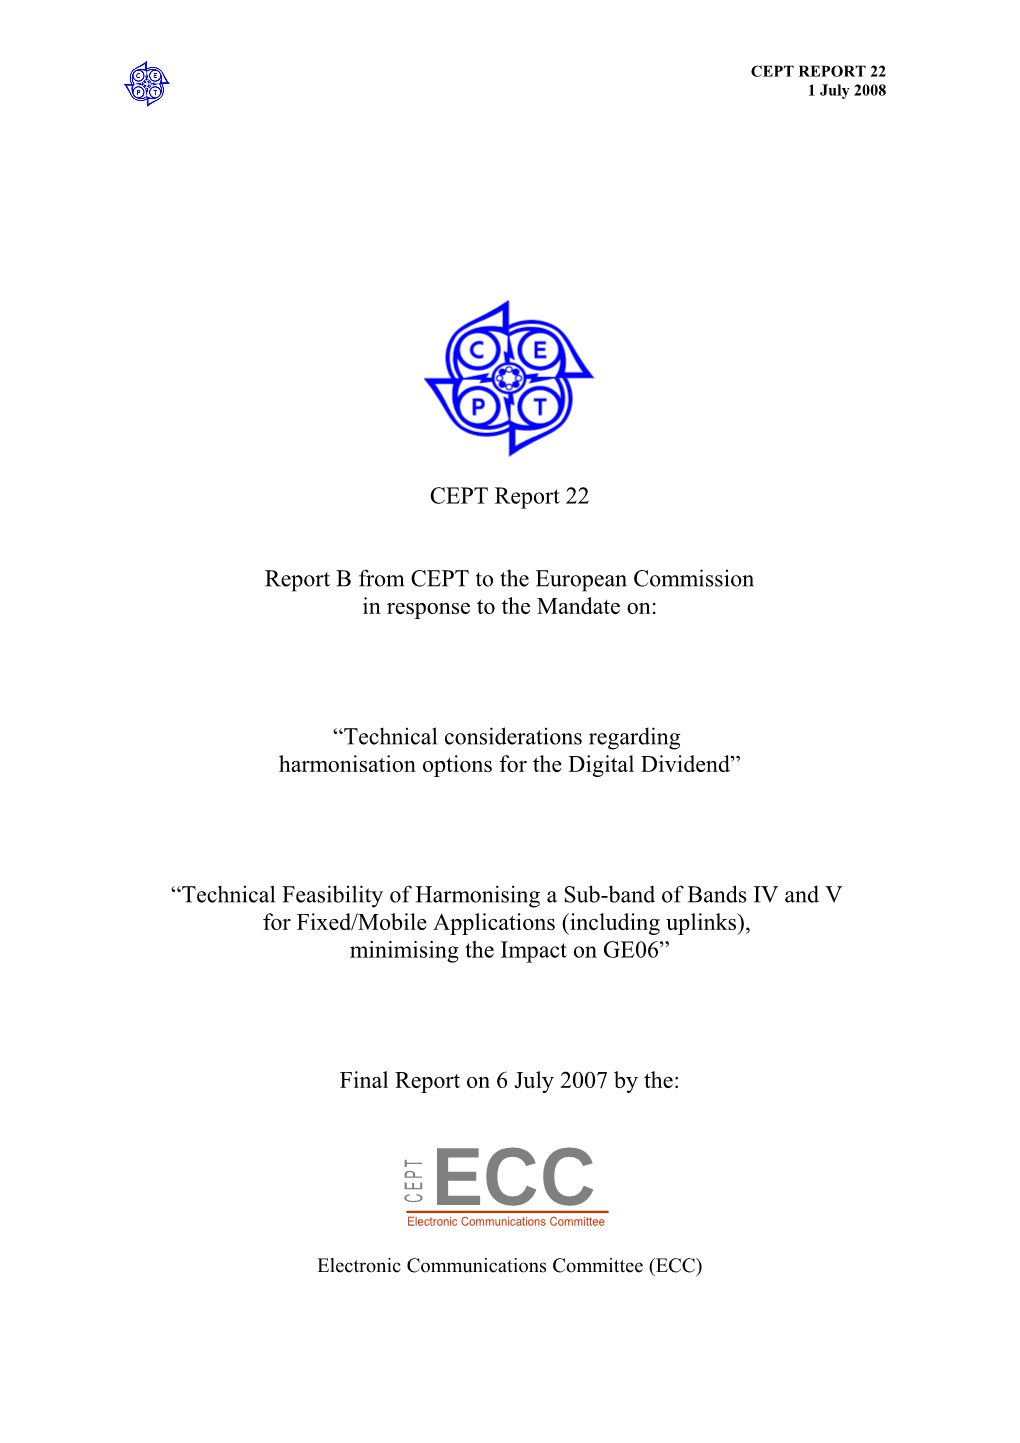 Report B from CEPT to the European Commission